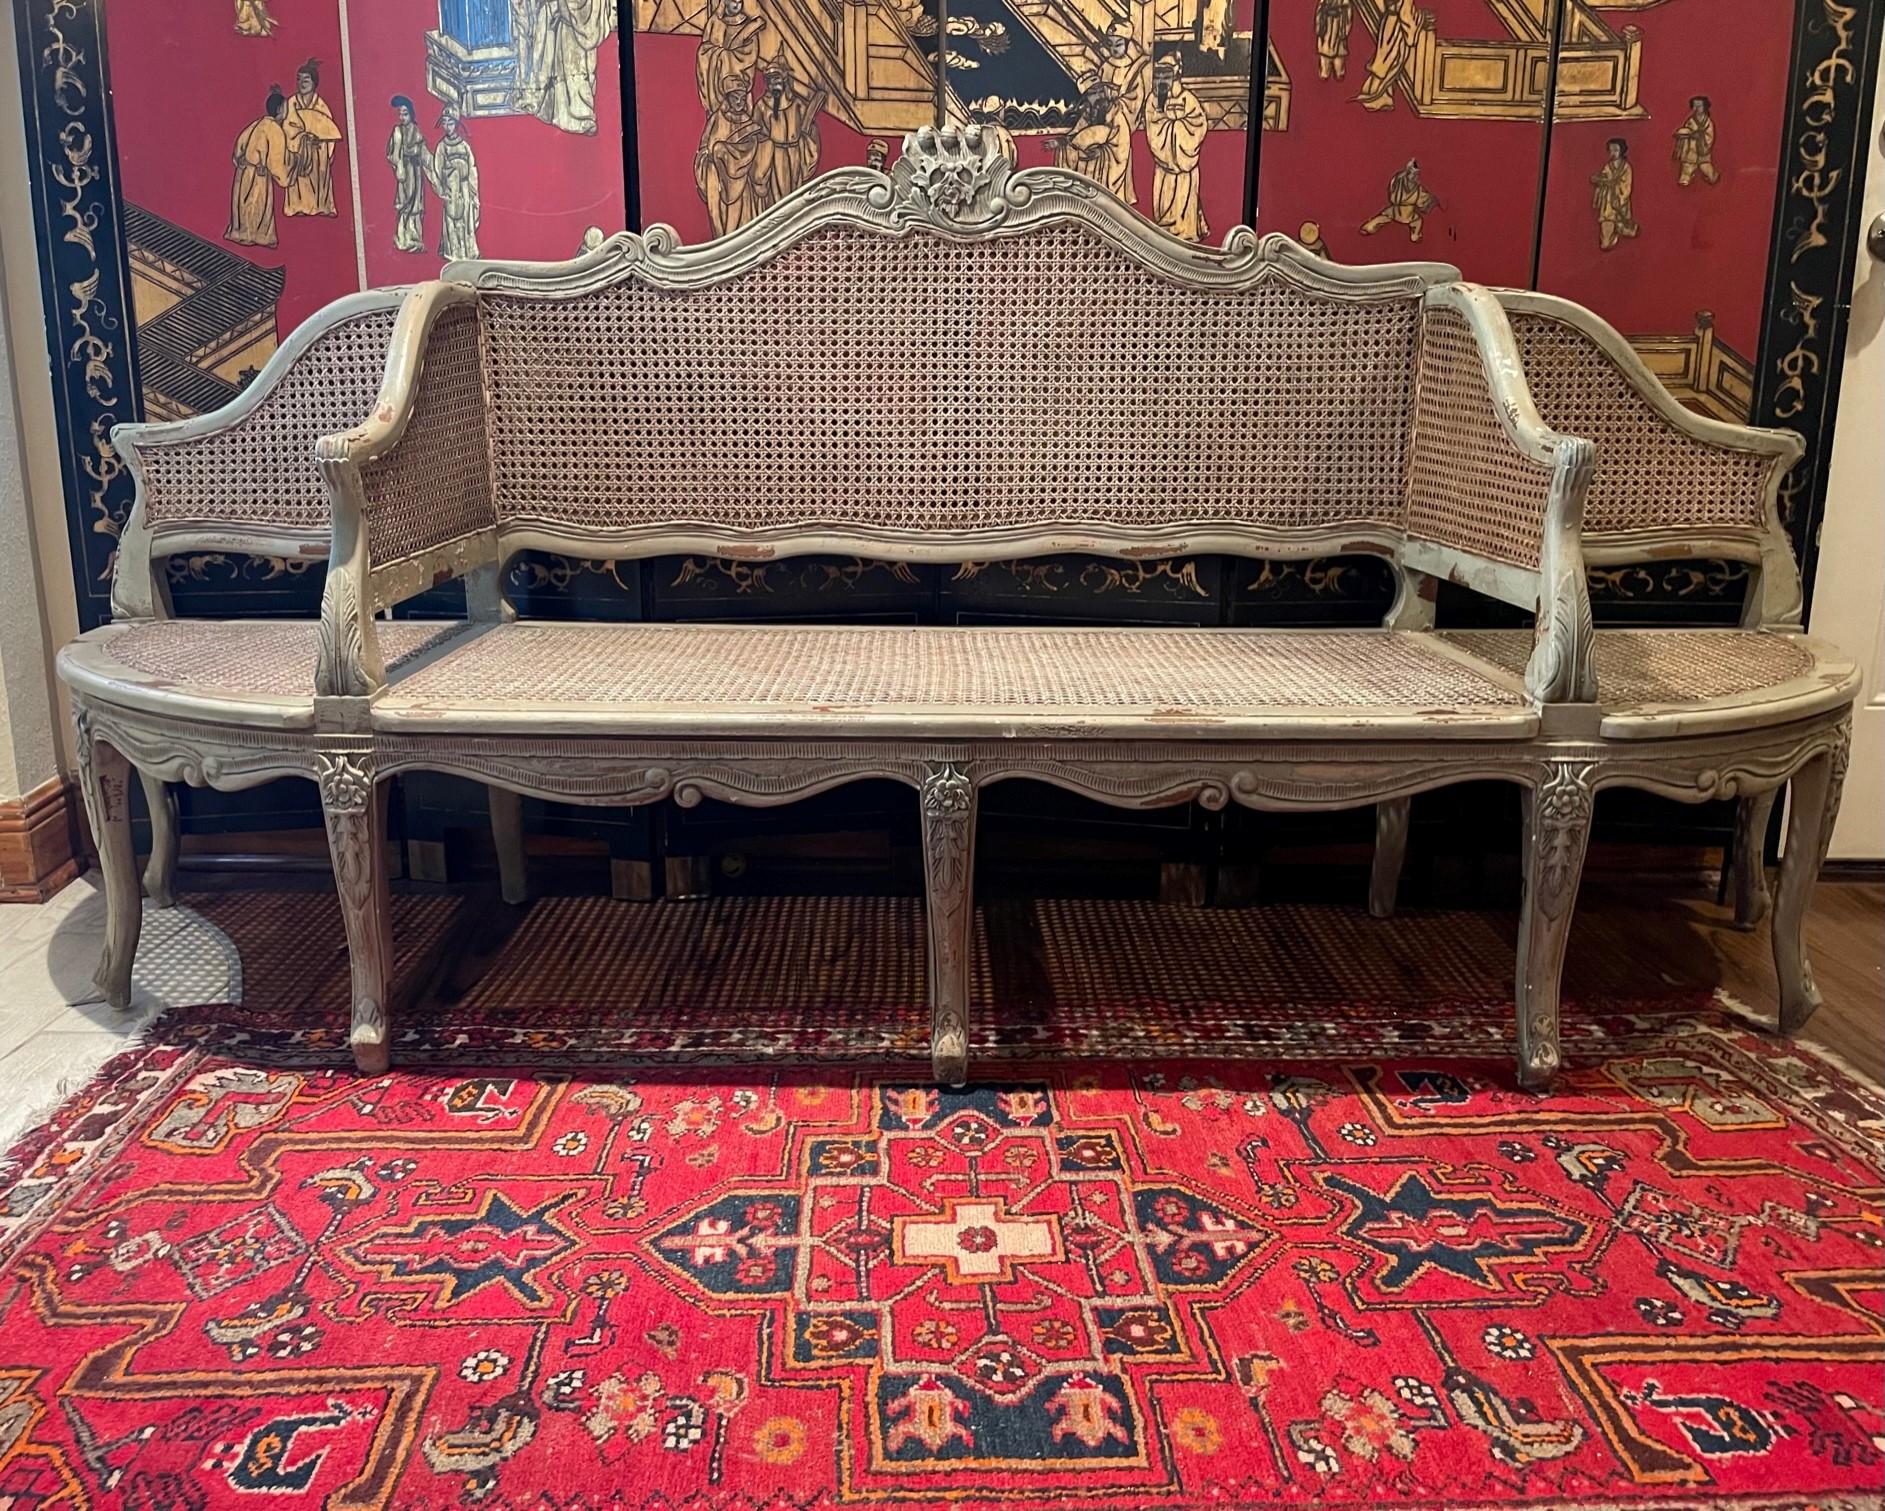 Late 19th century French caned sofa, canape a confidents.

Large movable -canape a confidents- seat, curving and counter-curving with floral motif carvings. It is designed in the style after Jean Baptiste Boulard, circa 1775, and represents all